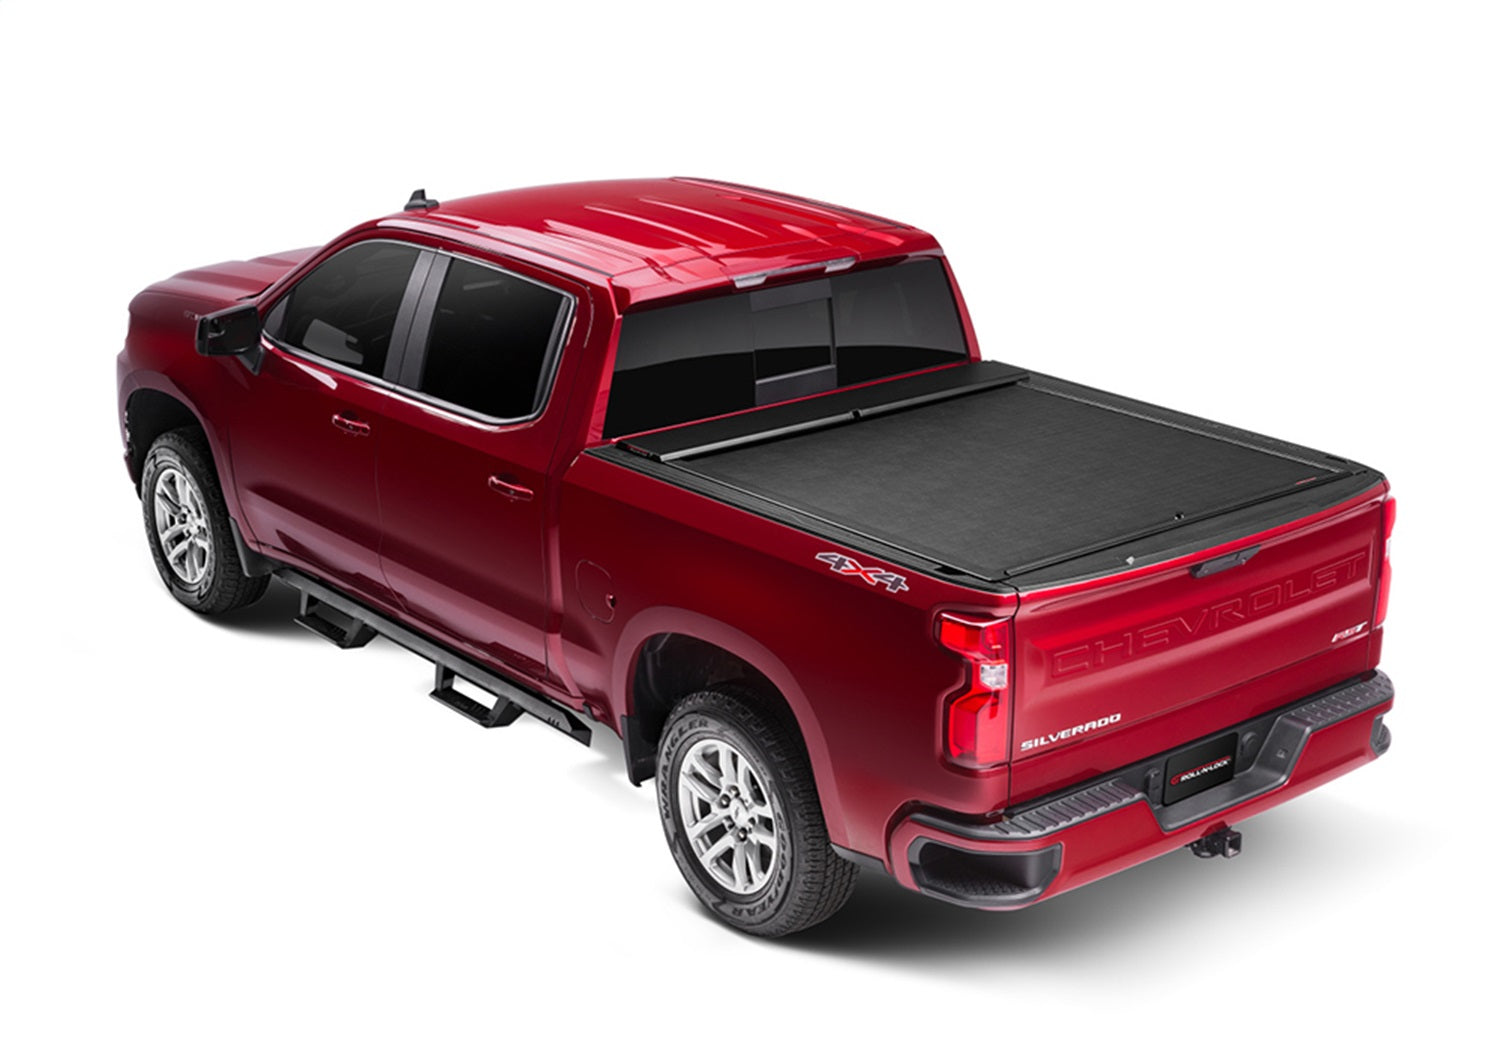 Roll-N-Lock LG262M Roll-N-Lock M-Series Truck Bed Cover Fits Canyon Colorado